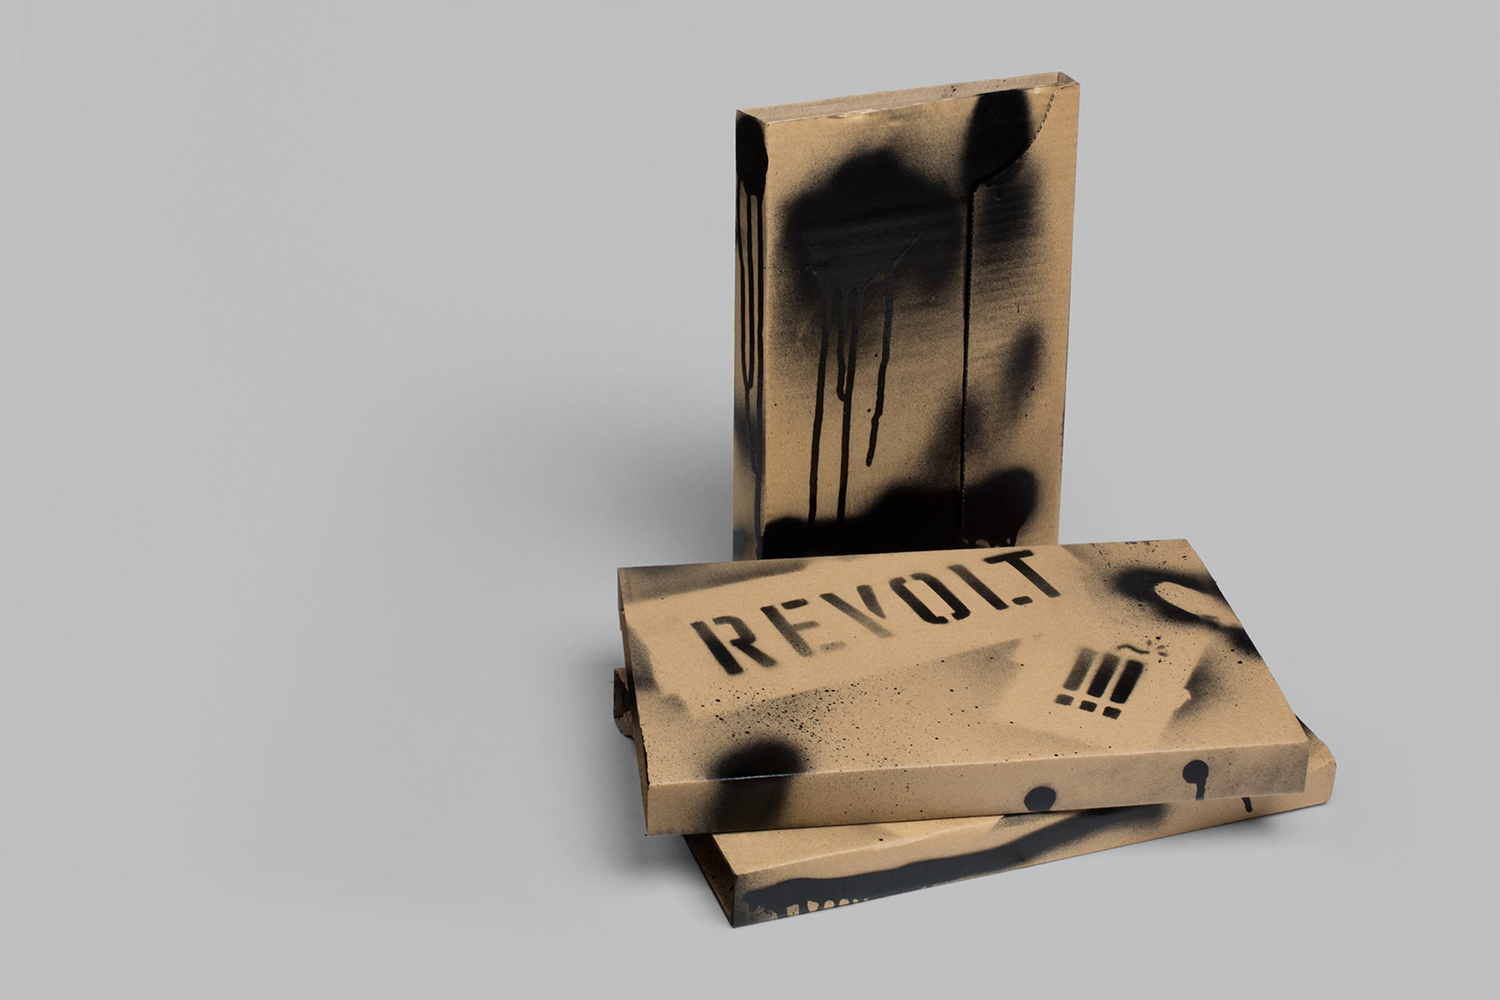 Packaging design by Paul Belford Ltd. for Revolt by Alex Lewis and Bridget Angear